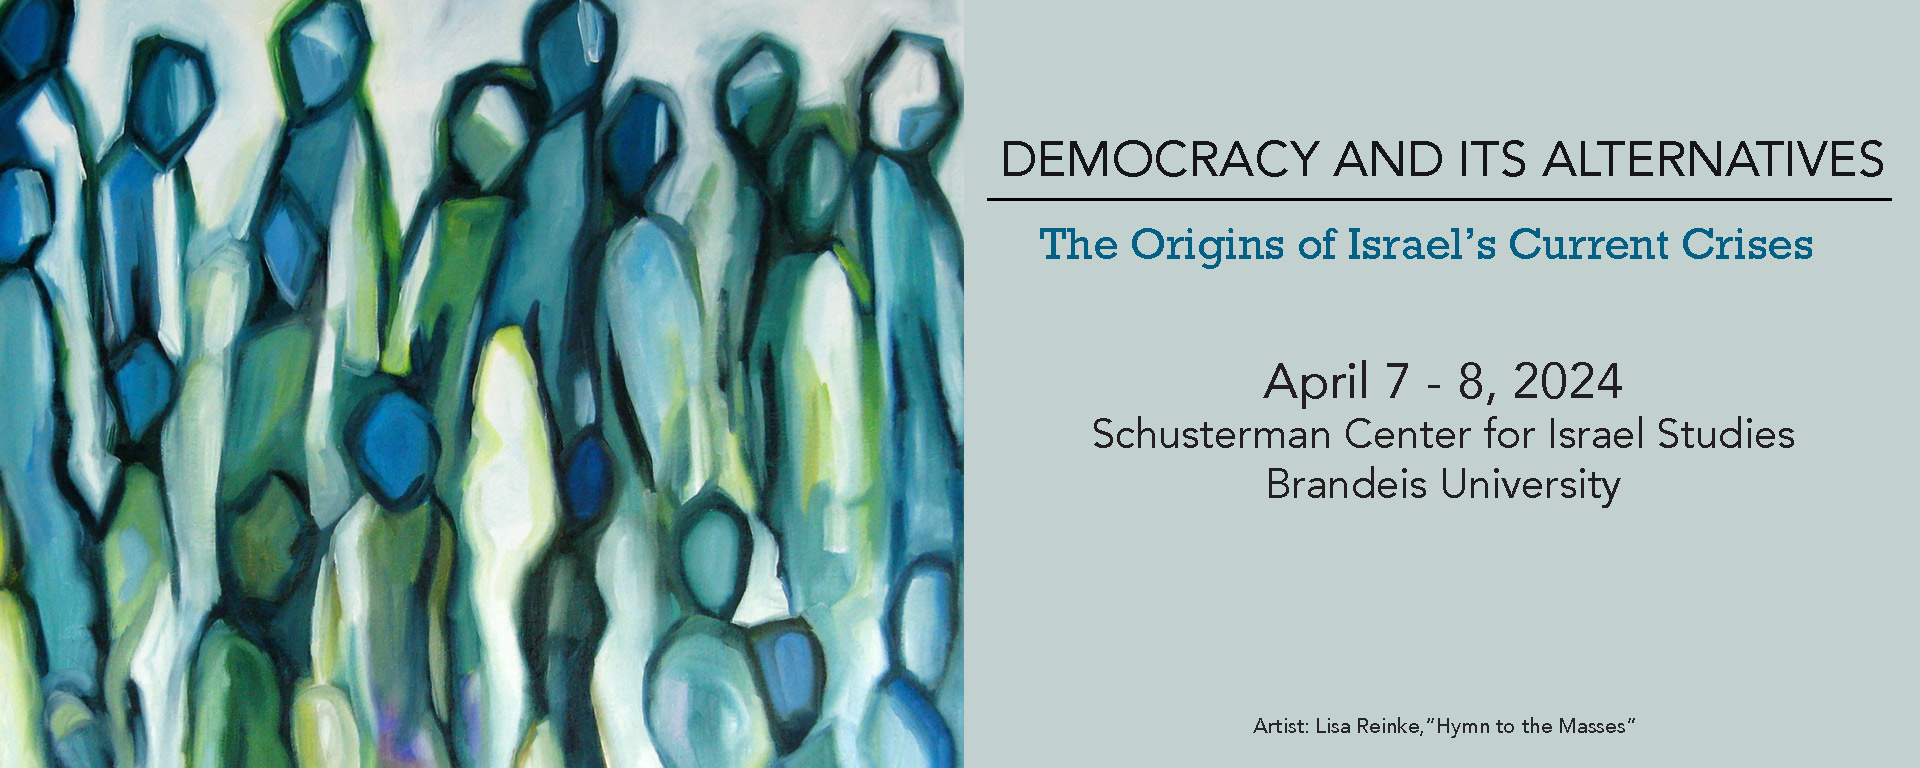 On left, painting of blue and green figures. On right, Democracy and Its Alternatives, The Origins of Israel's Current Crises, April 7-8, 2024, Schusterman Center for Israel Studies, Brandeis University, Artist: Lisa Reinke, "Hymn to the Masses"